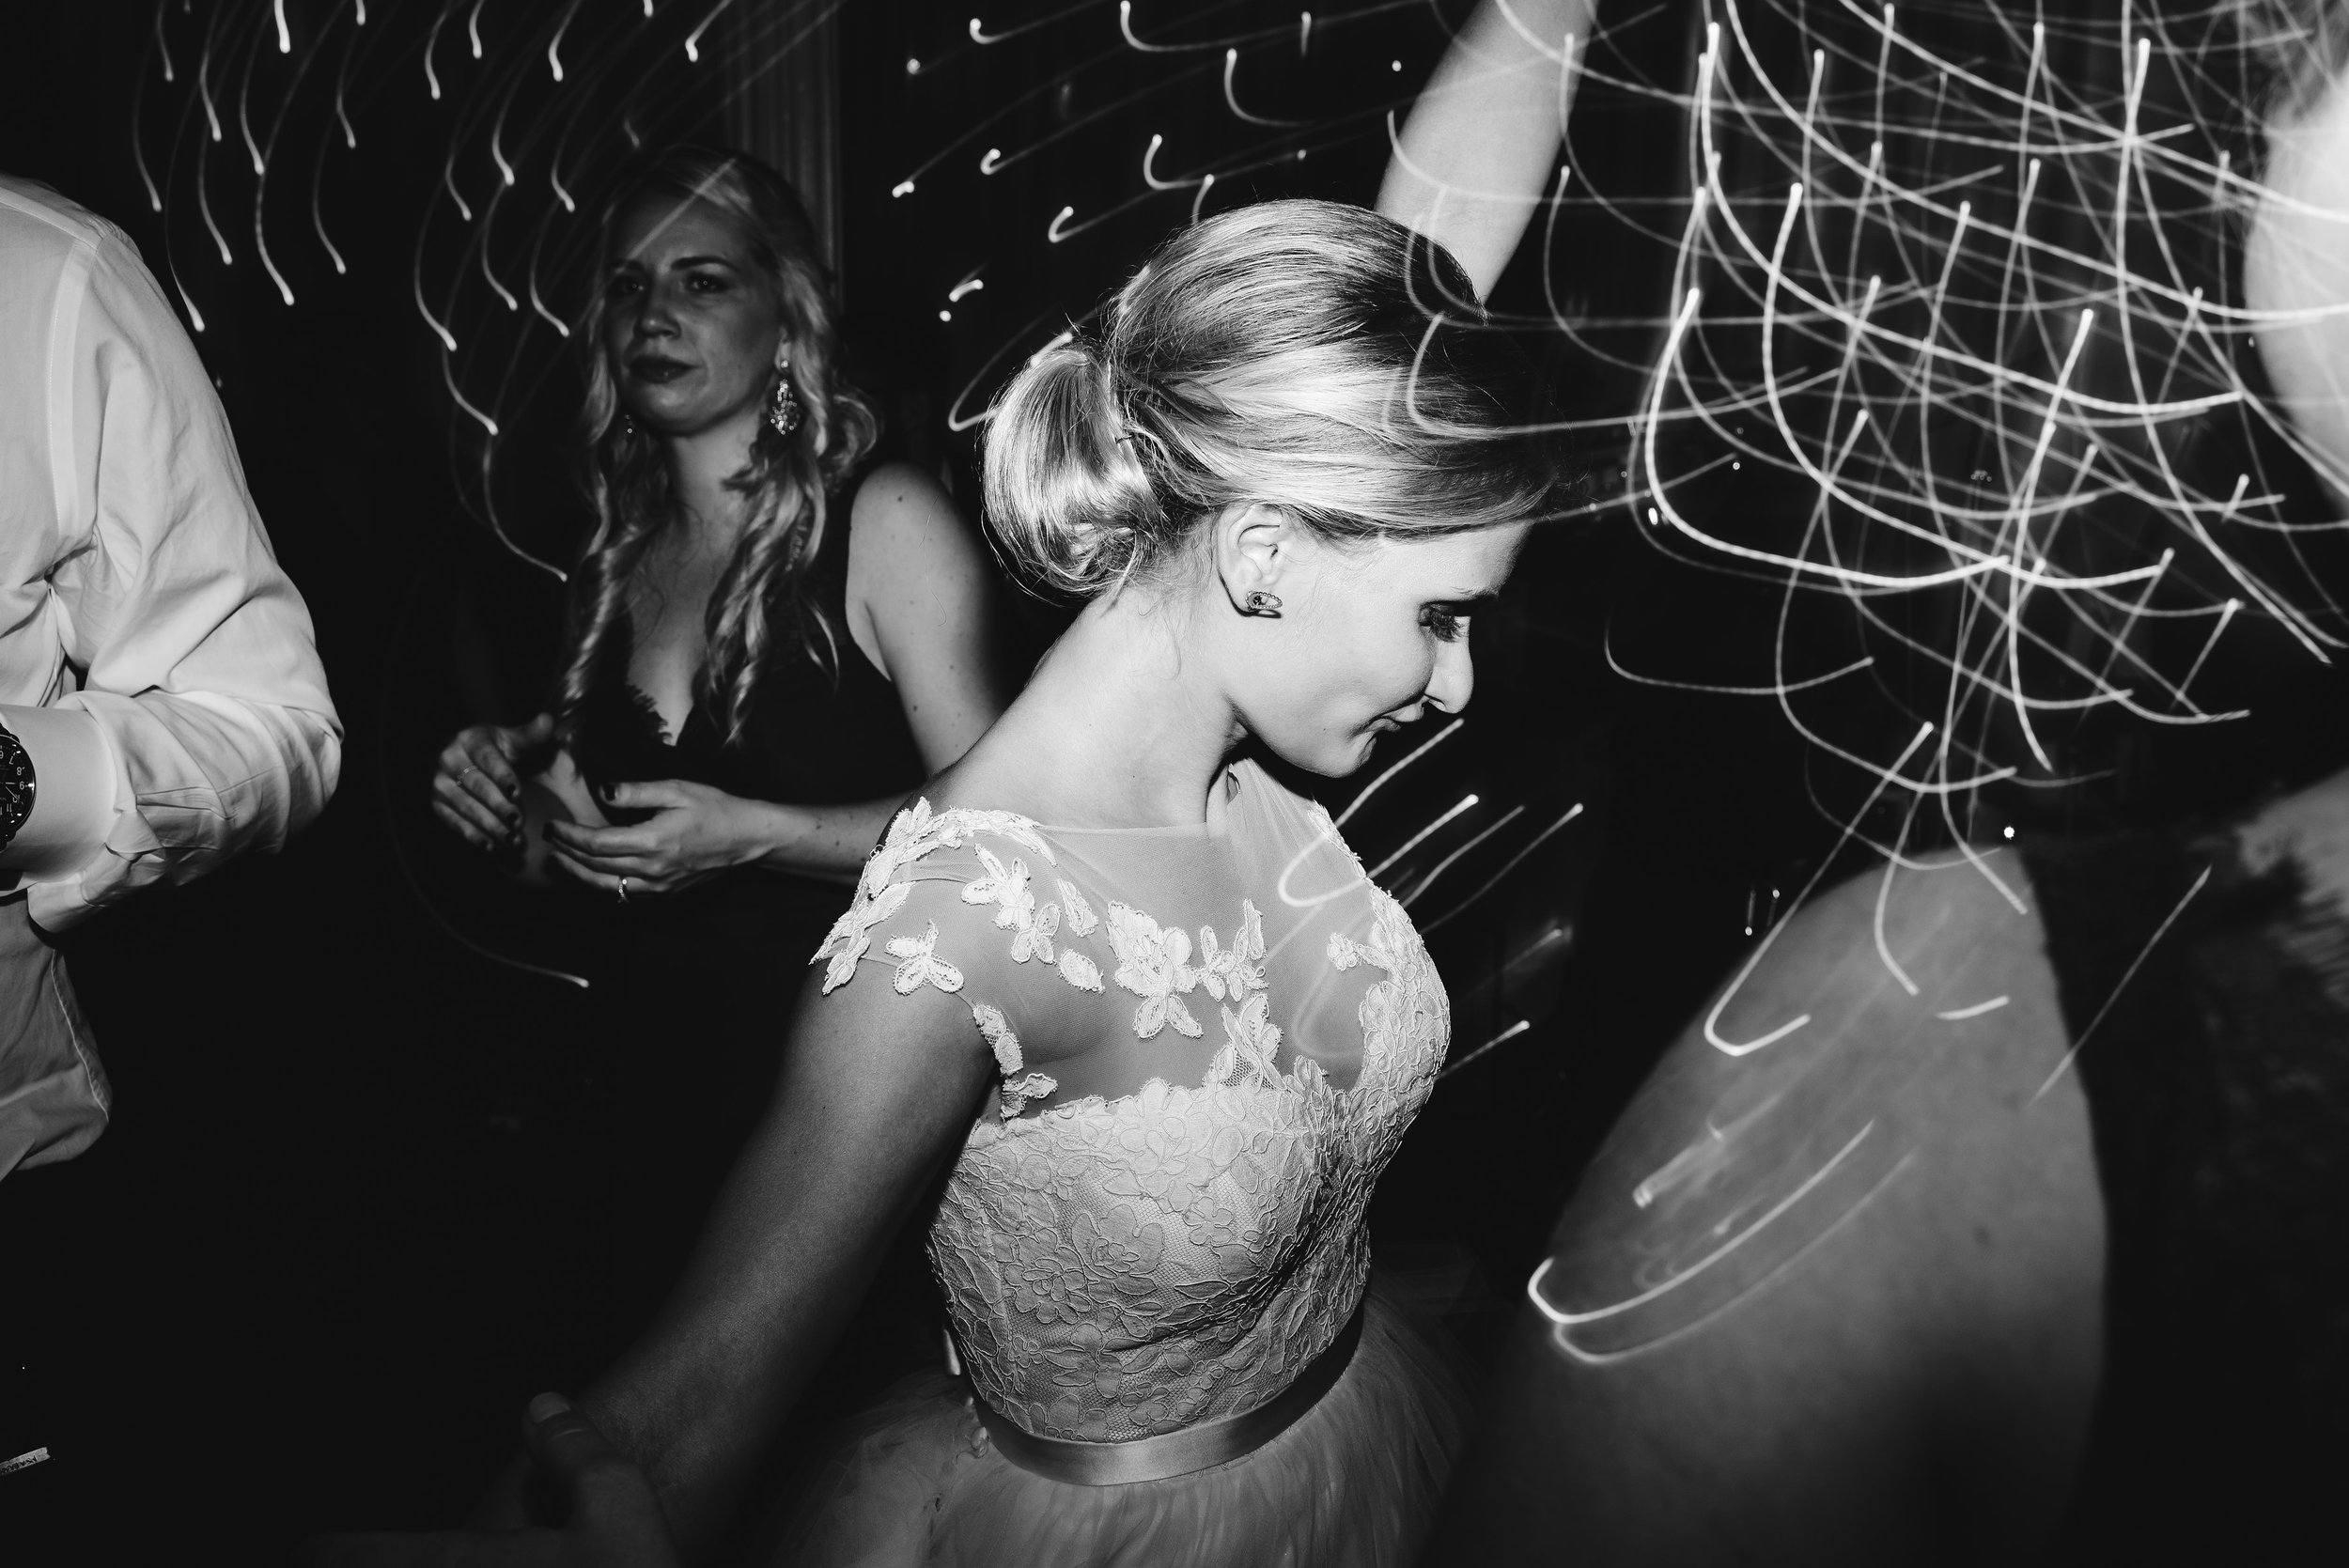 Bride partying at wedding reception with hand up in air